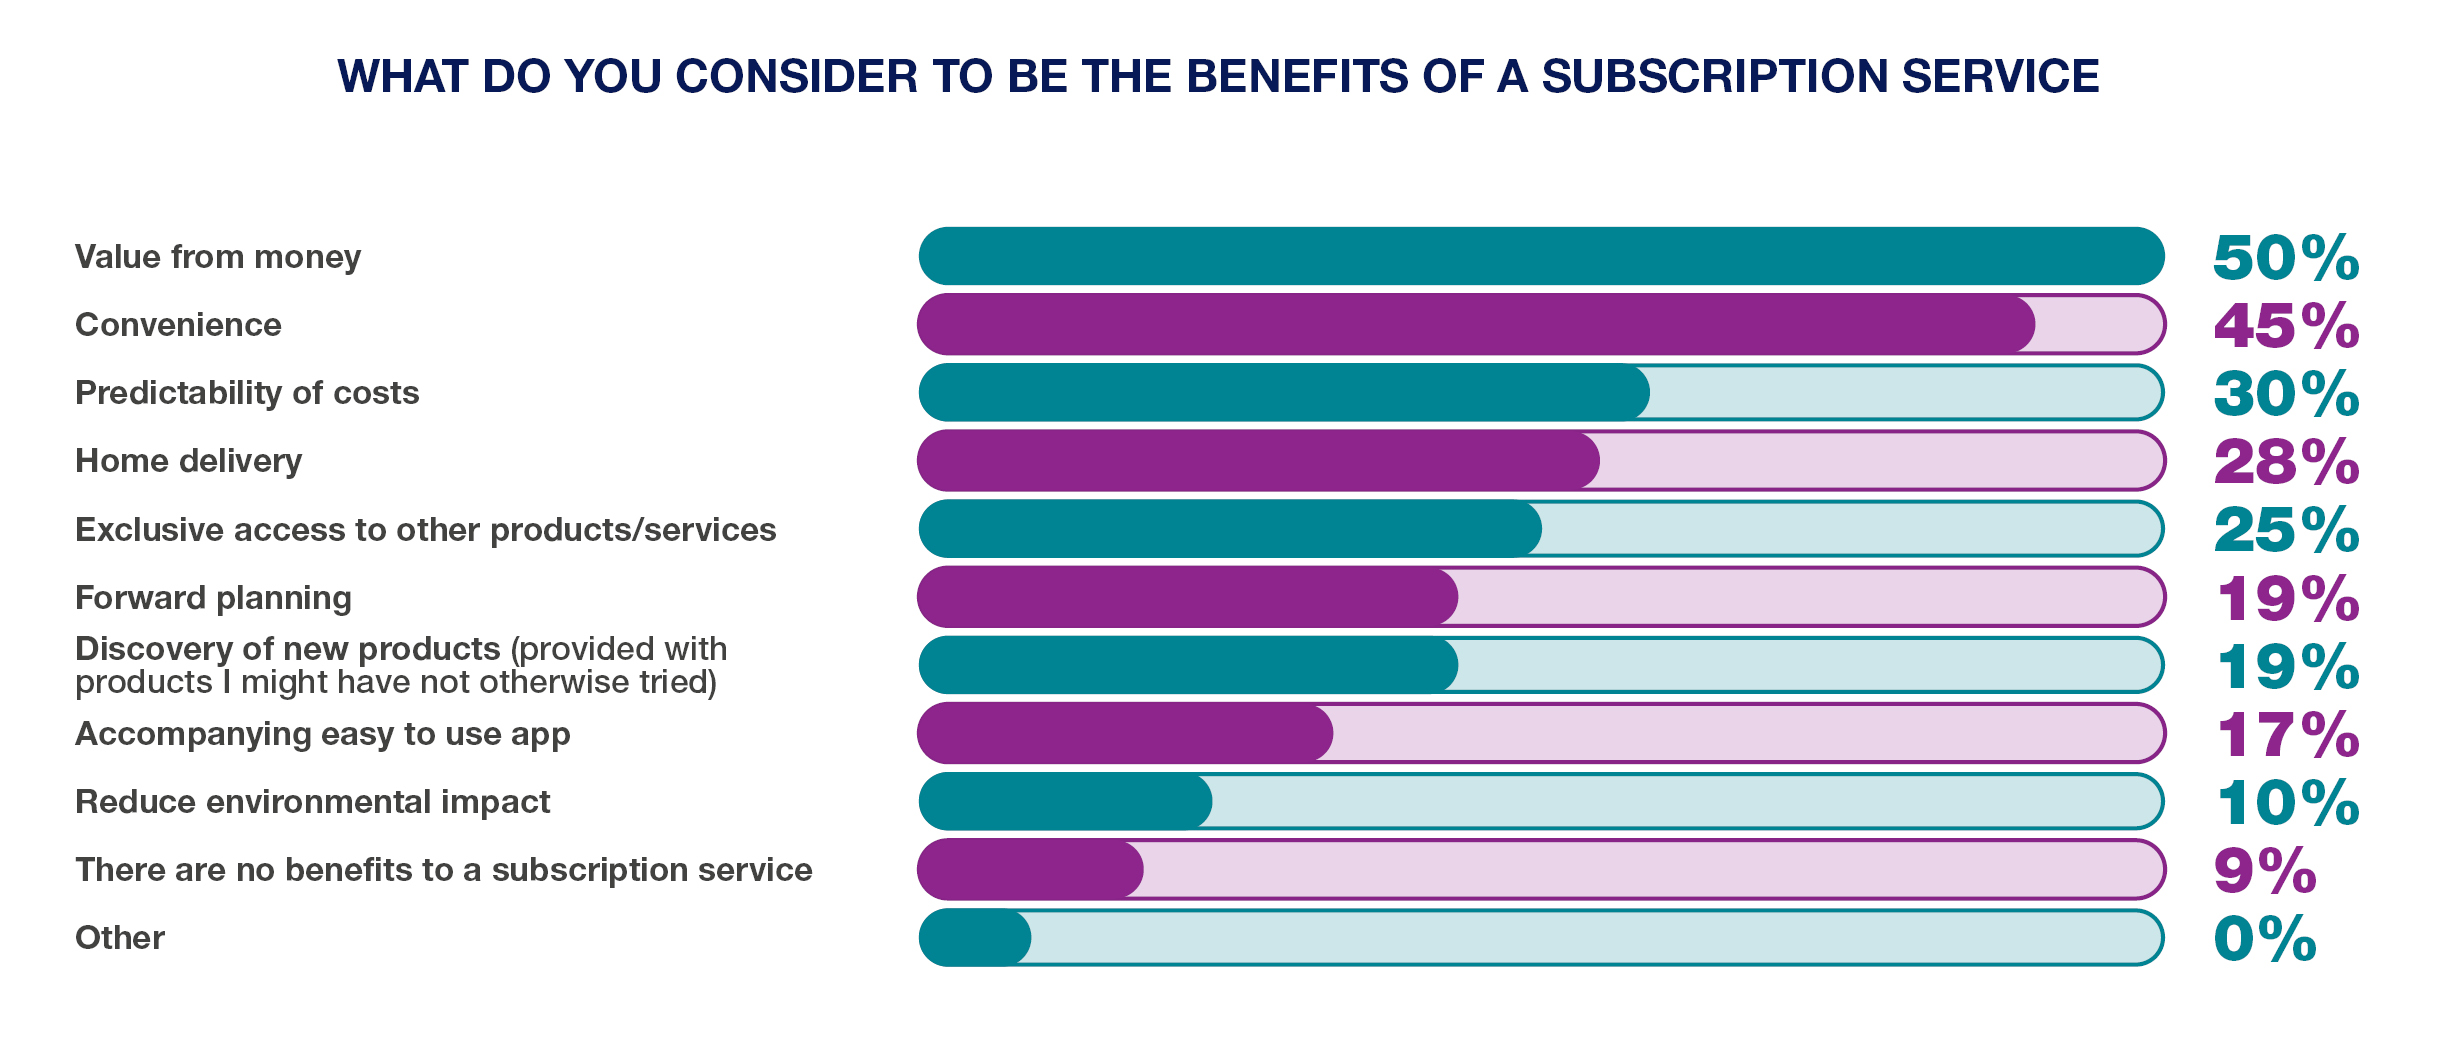 Chart showing the most popular benefits of subscription services